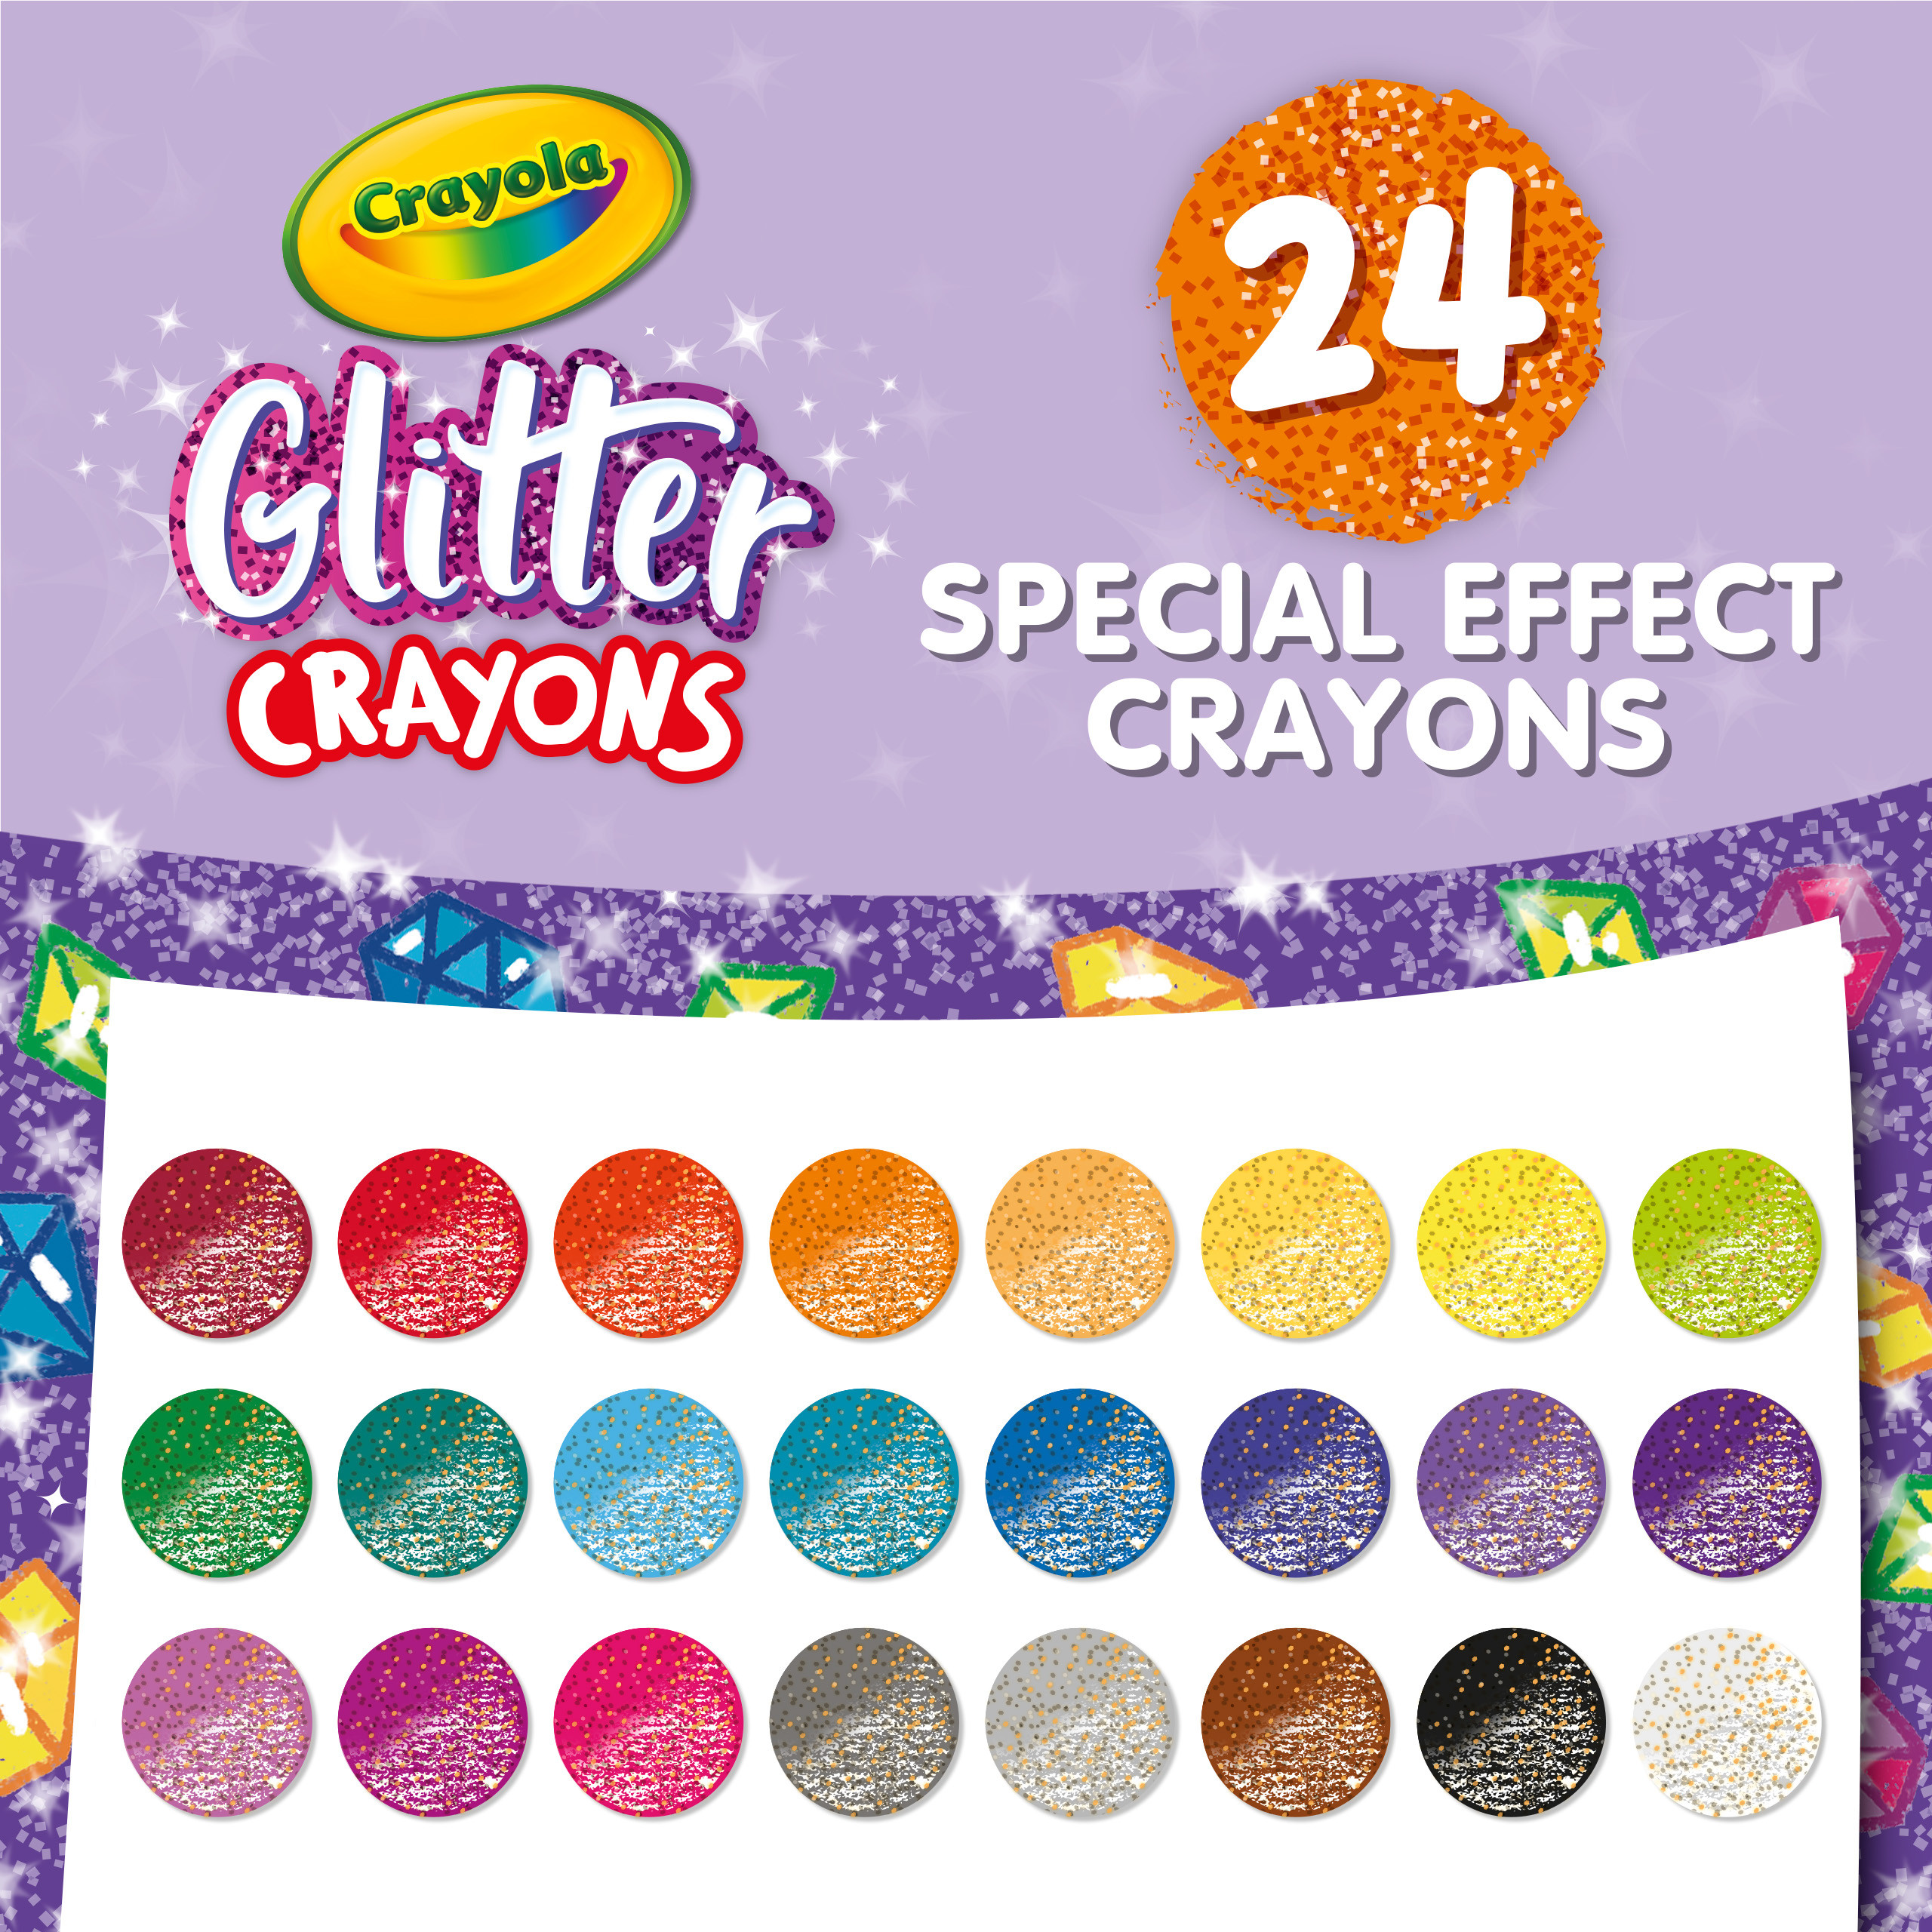 Crayola Glitter Crayons, Assorted Colors, Child, 24 Count - image 6 of 9